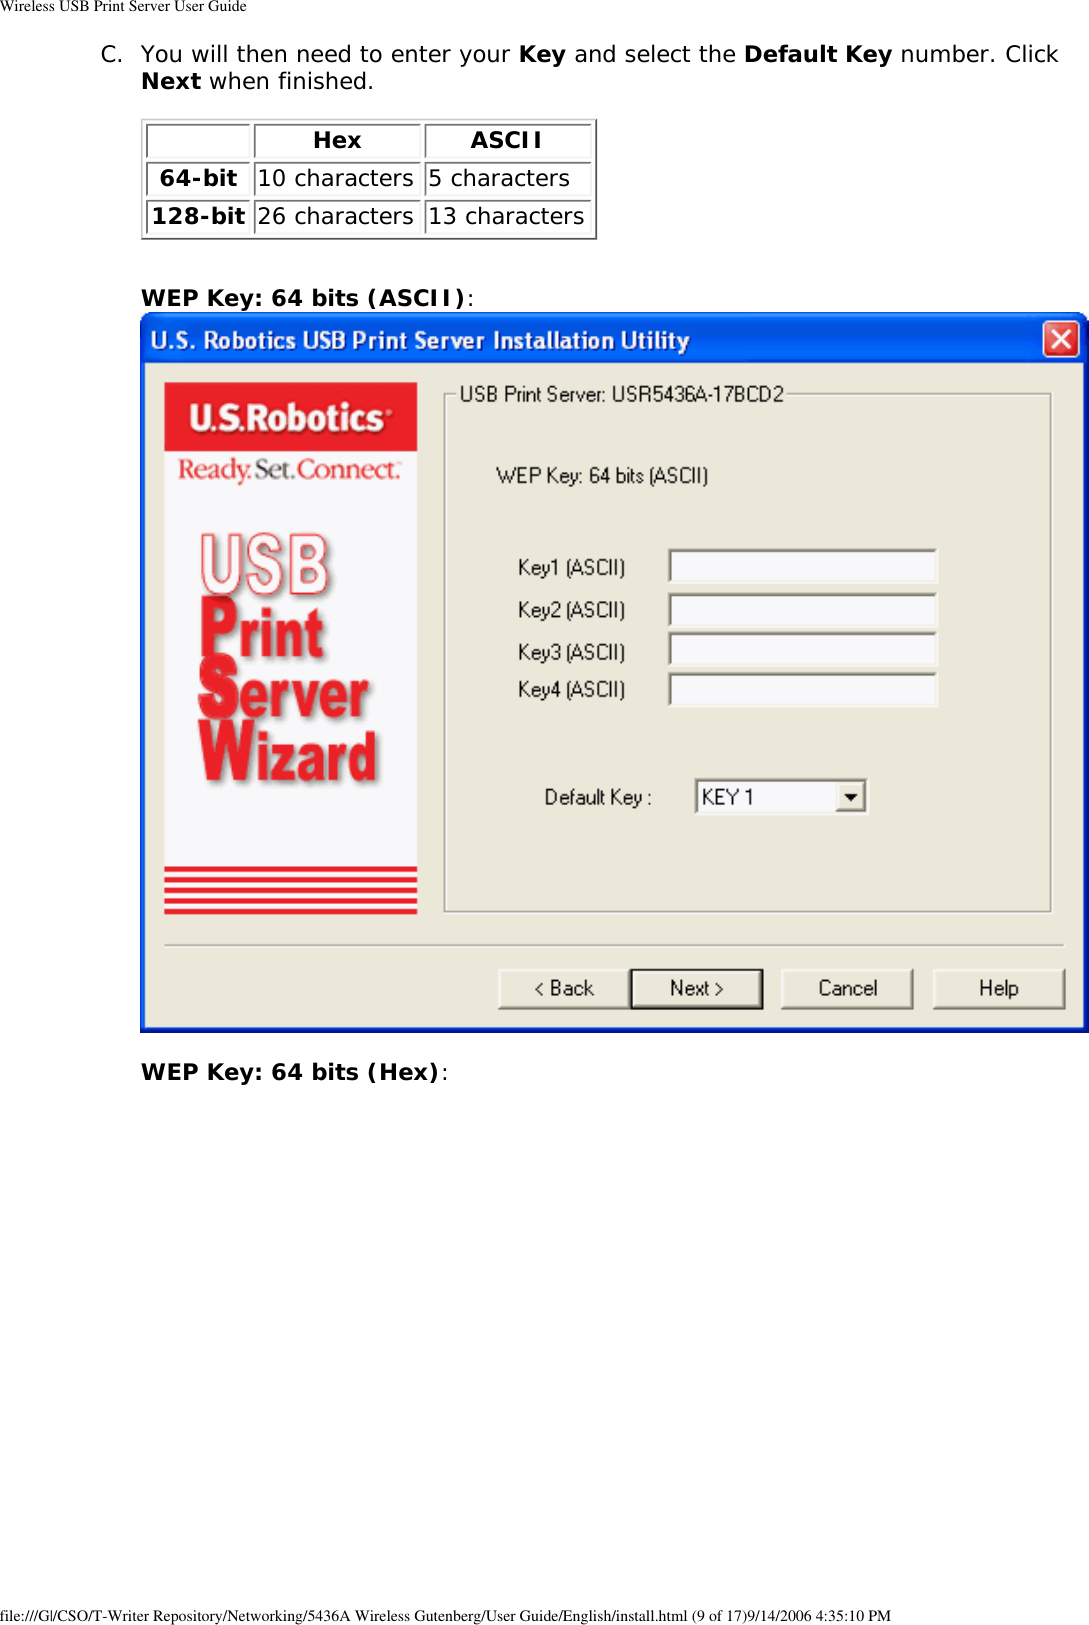 Wireless USB Print Server User GuideC.  You will then need to enter your Key and select the Default Key number. Click Next when finished.    Hex ASCII64-bit 10 characters 5 characters128-bit 26 characters 13 characters  WEP Key: 64 bits (ASCII):     WEP Key: 64 bits (Hex):  file:///G|/CSO/T-Writer Repository/Networking/5436A Wireless Gutenberg/User Guide/English/install.html (9 of 17)9/14/2006 4:35:10 PM